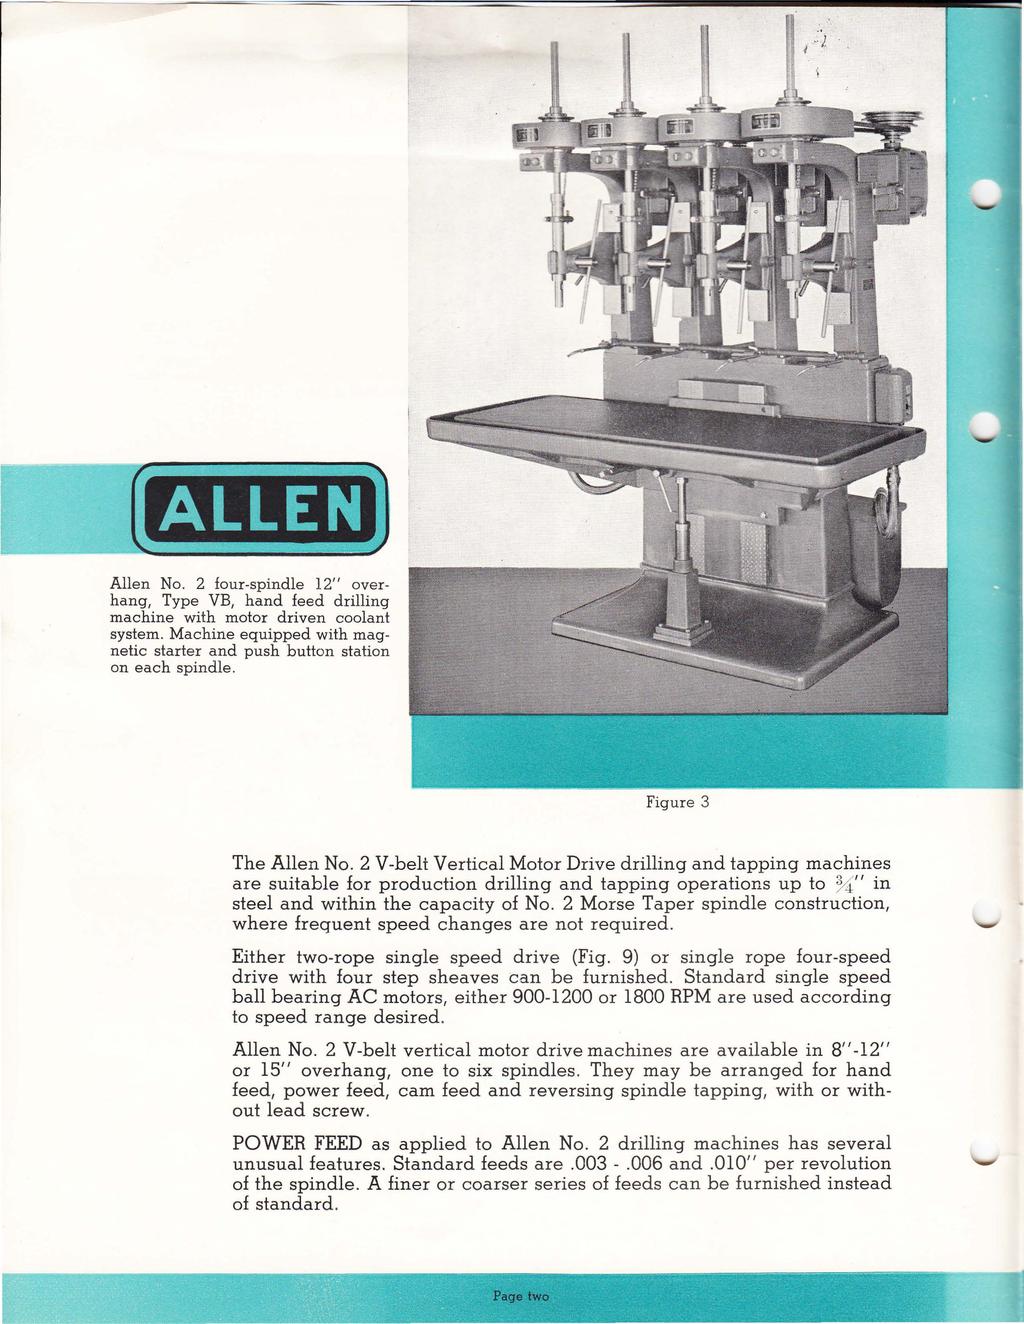 - Allen No. 2 four-spindle 12" overhang, Type VB, hand feed drilling machine with motor driven coolant system. Machine equipped with magnetic starter and push button station on each spindle.